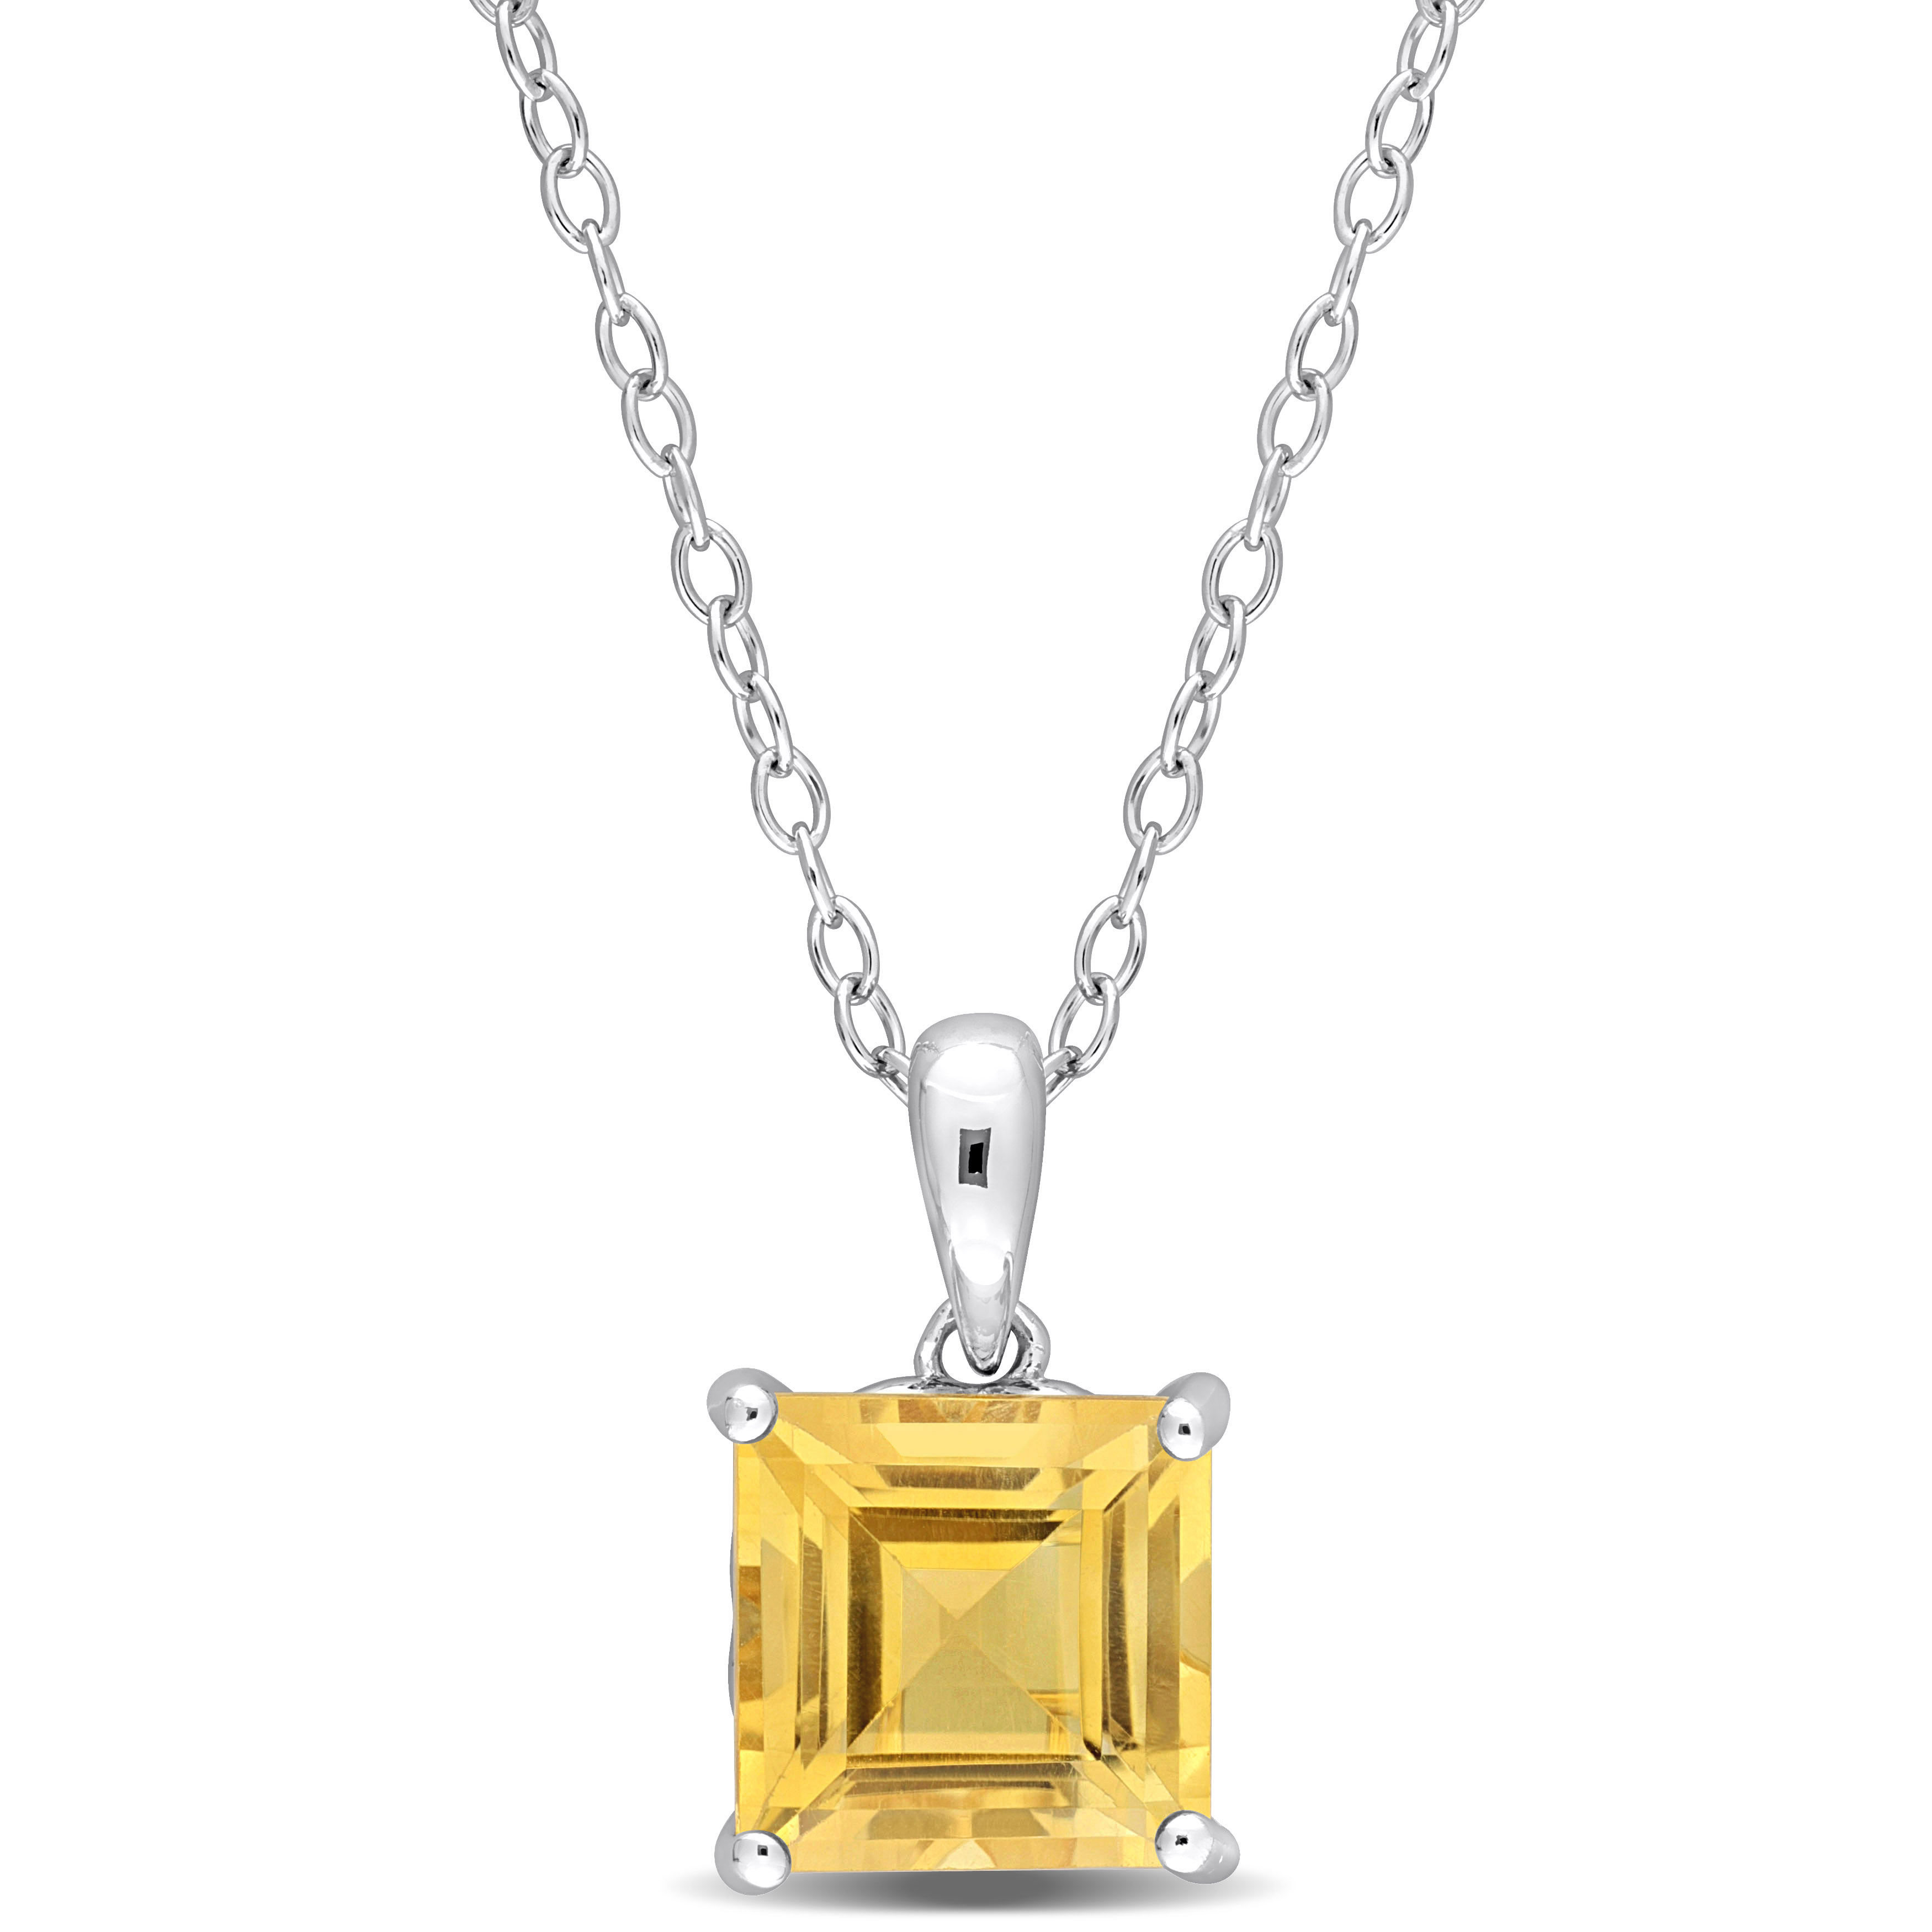 2 2/5 CT TGW Princess Cut Citrine Solitaire Heart Design Pendant with Chain in Sterling Silver - 18 in.